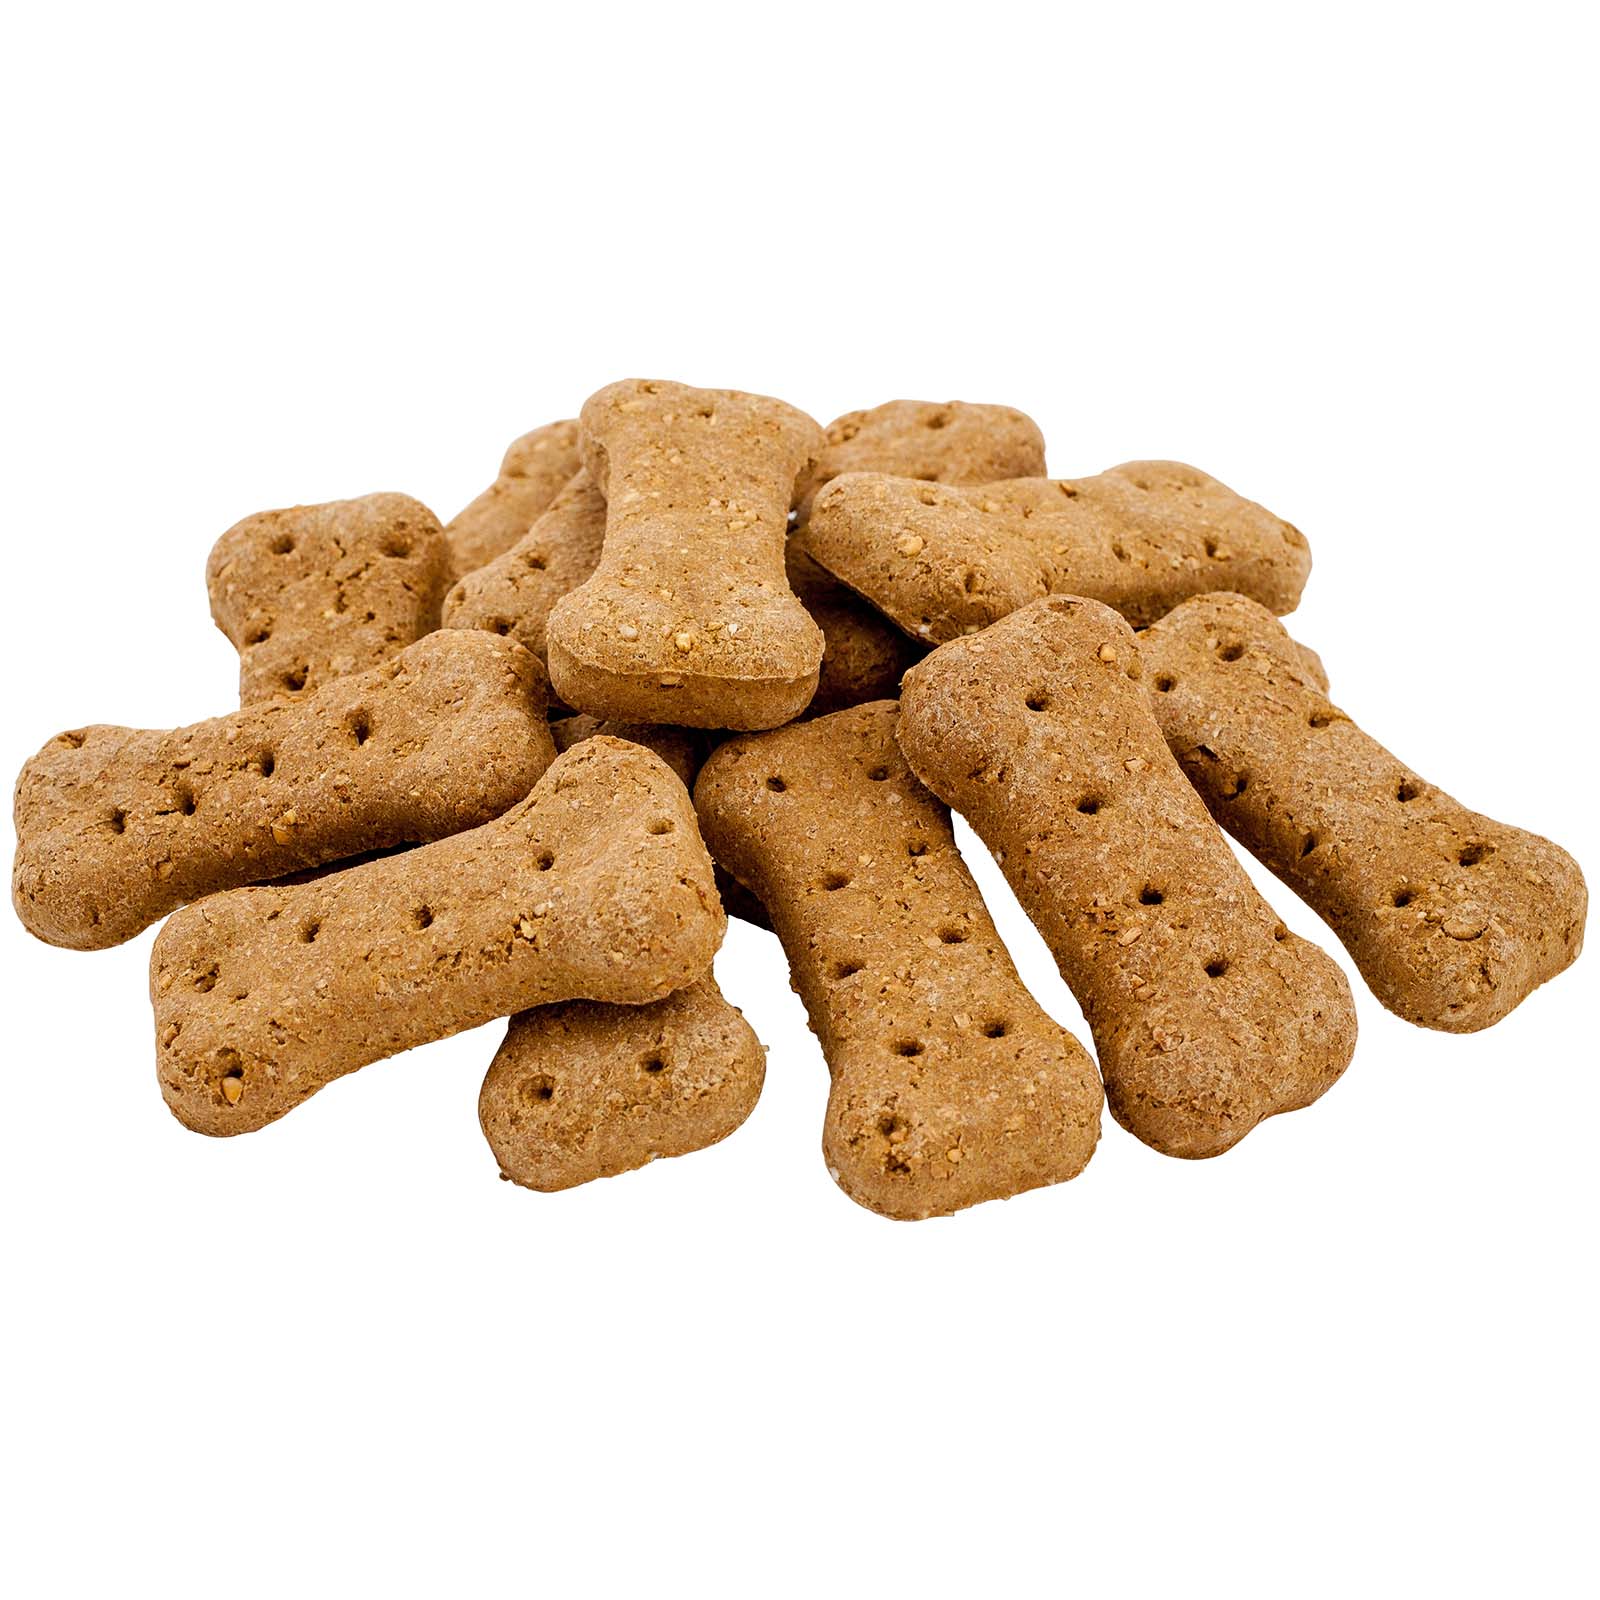 Black Dog Naturally Baked Peanut Butter Australian Biscuit Treats for Dogs - 5kg image 0